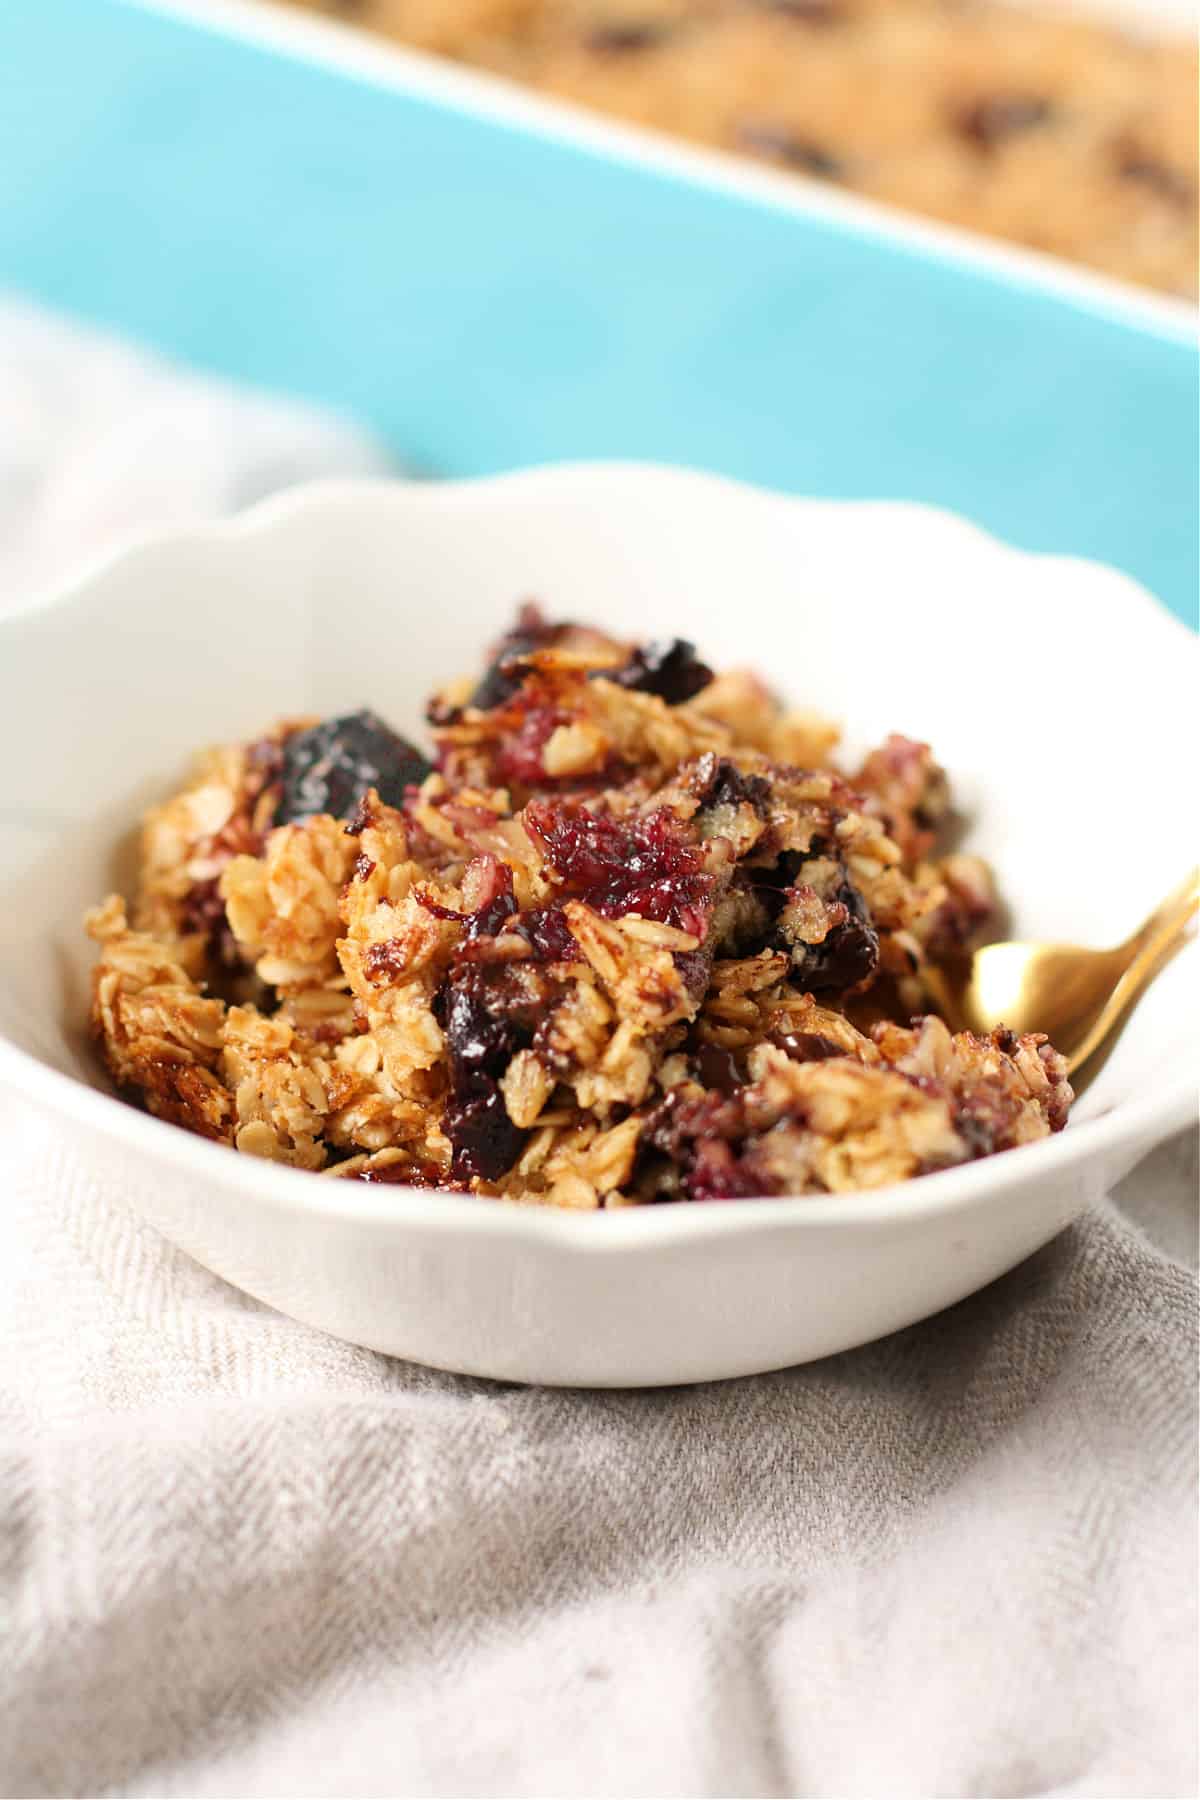 egg free baked oatmeal with cherries in a bowl